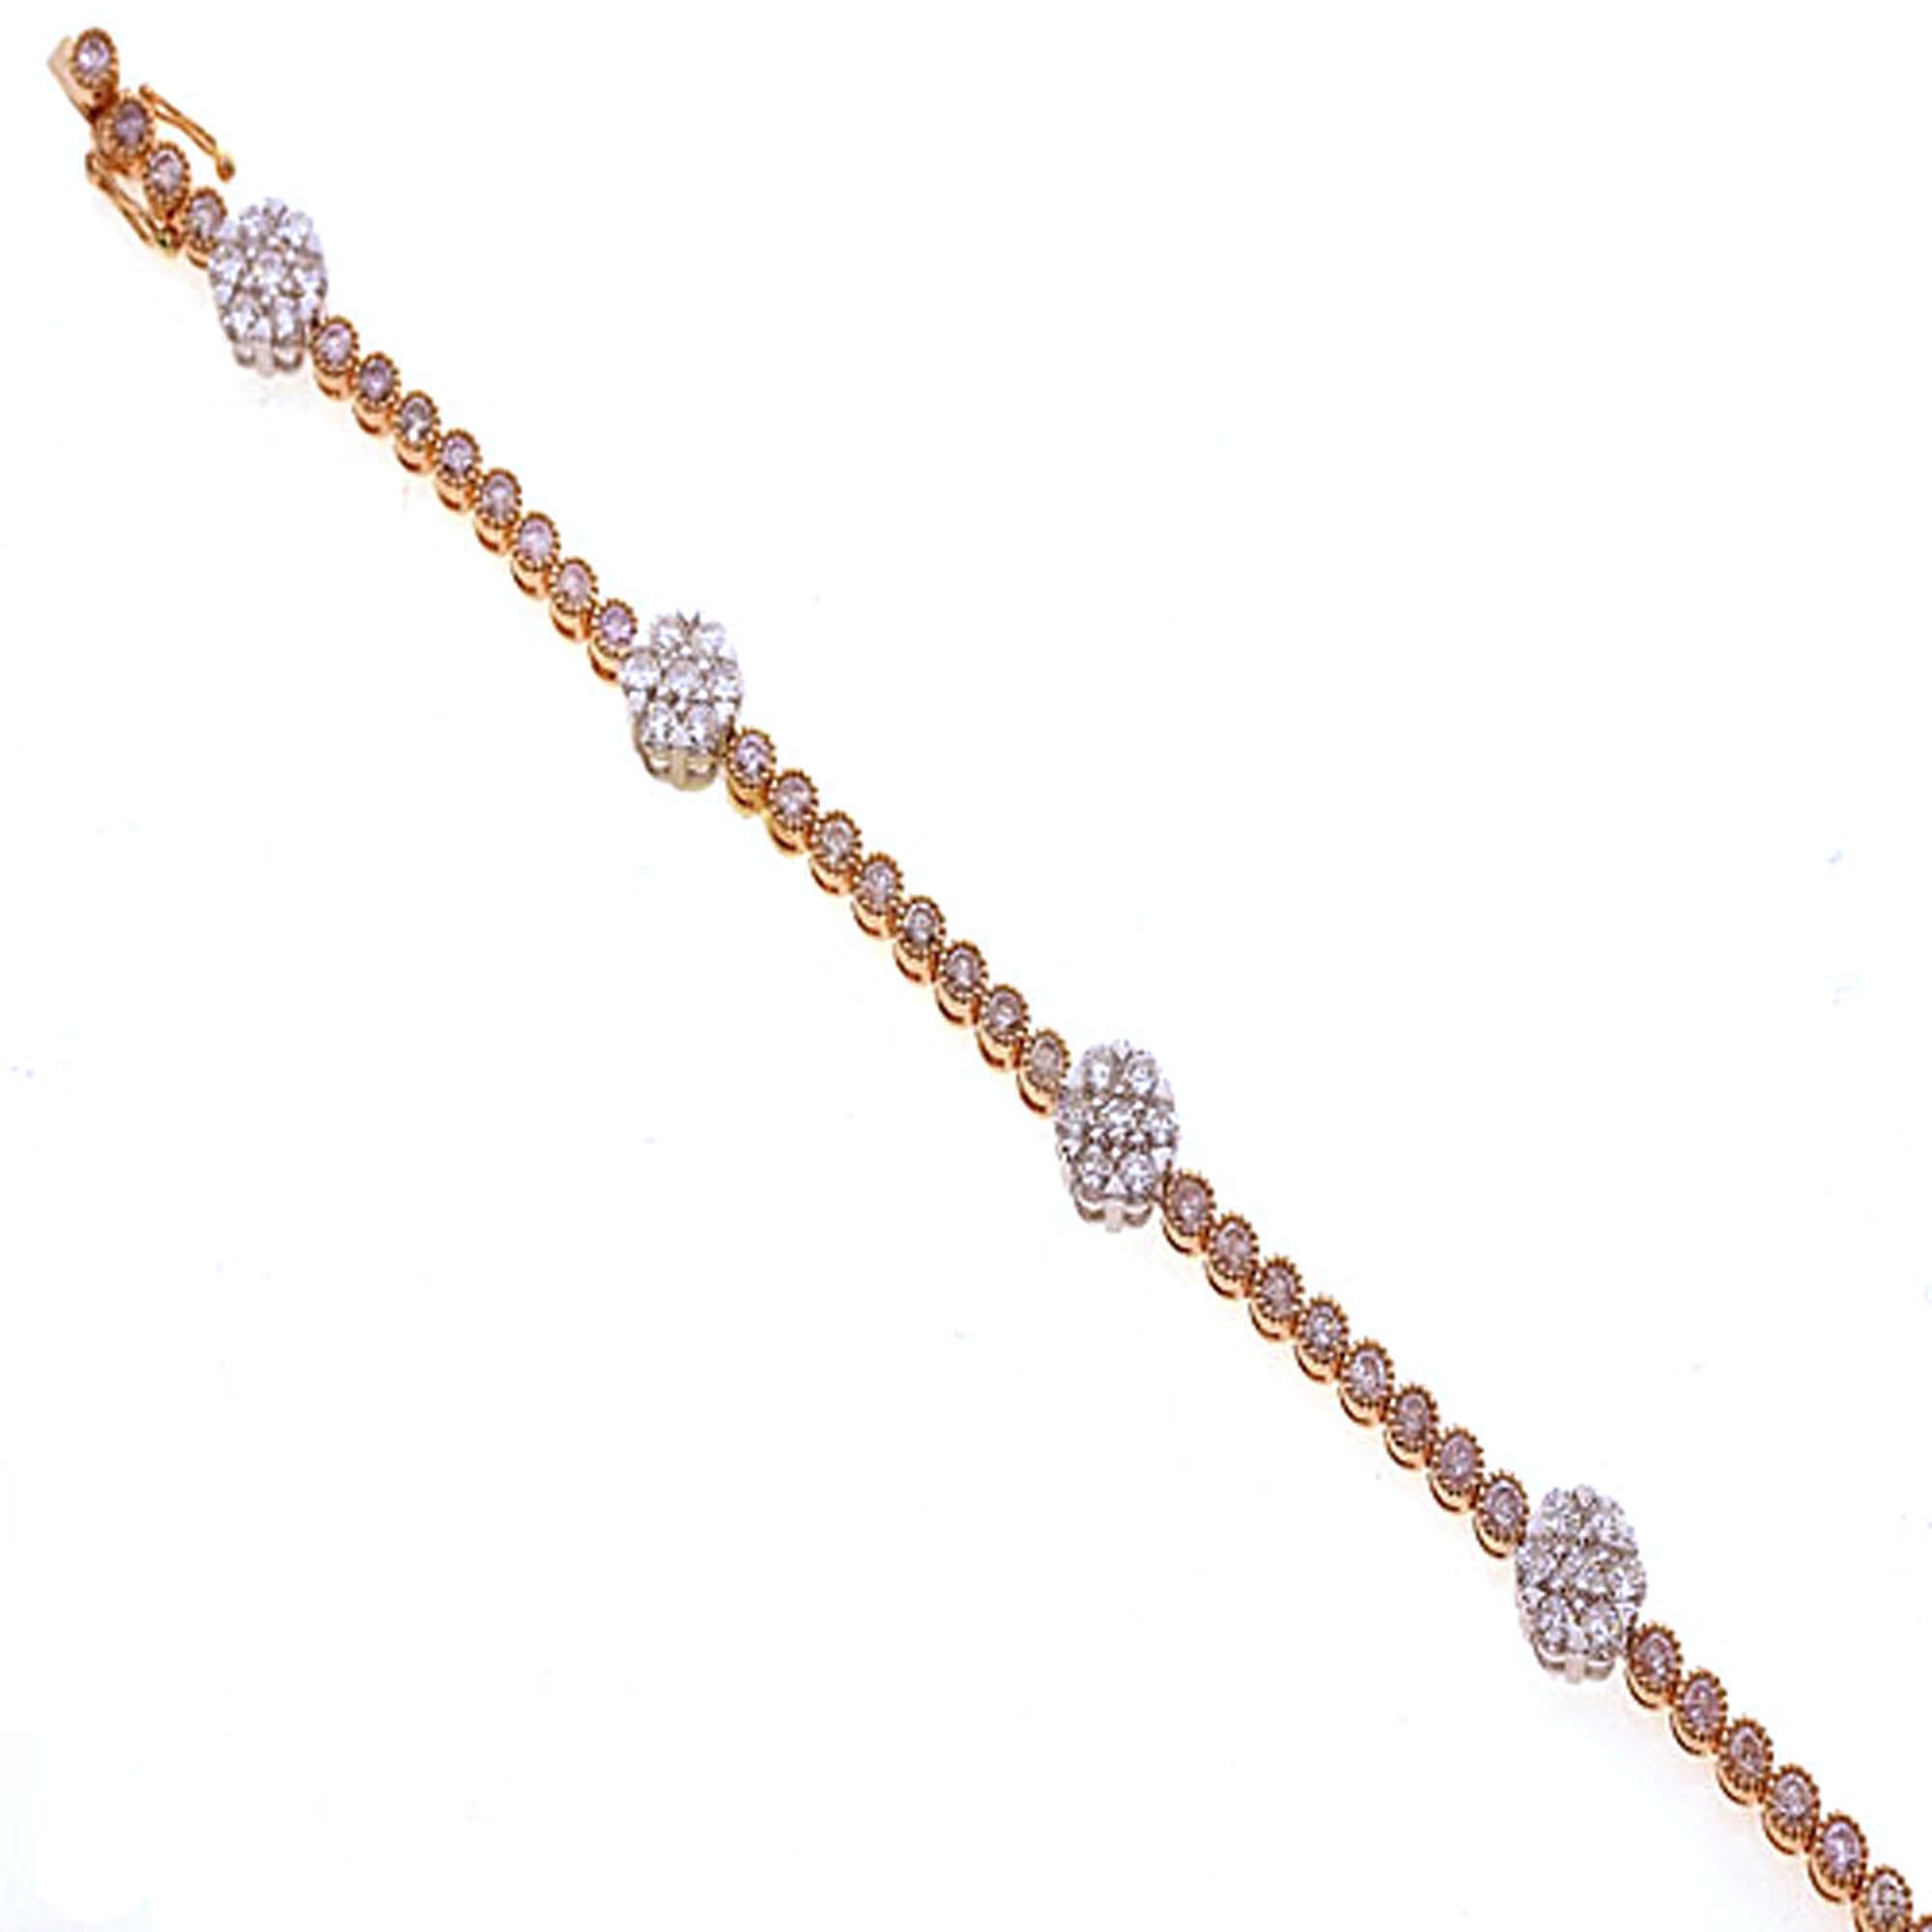 Beautiful and elegant 5.62 Carat Natural Pink Diamond Bracelet made by Almor Designs. The Natural Pink Diamonds Weigh 2.74 Carats, and the White Diamonds Weigh 2.88 Carats. This bracelet is set in 18 Karat Rose and White Gold, and Weighs 14.07